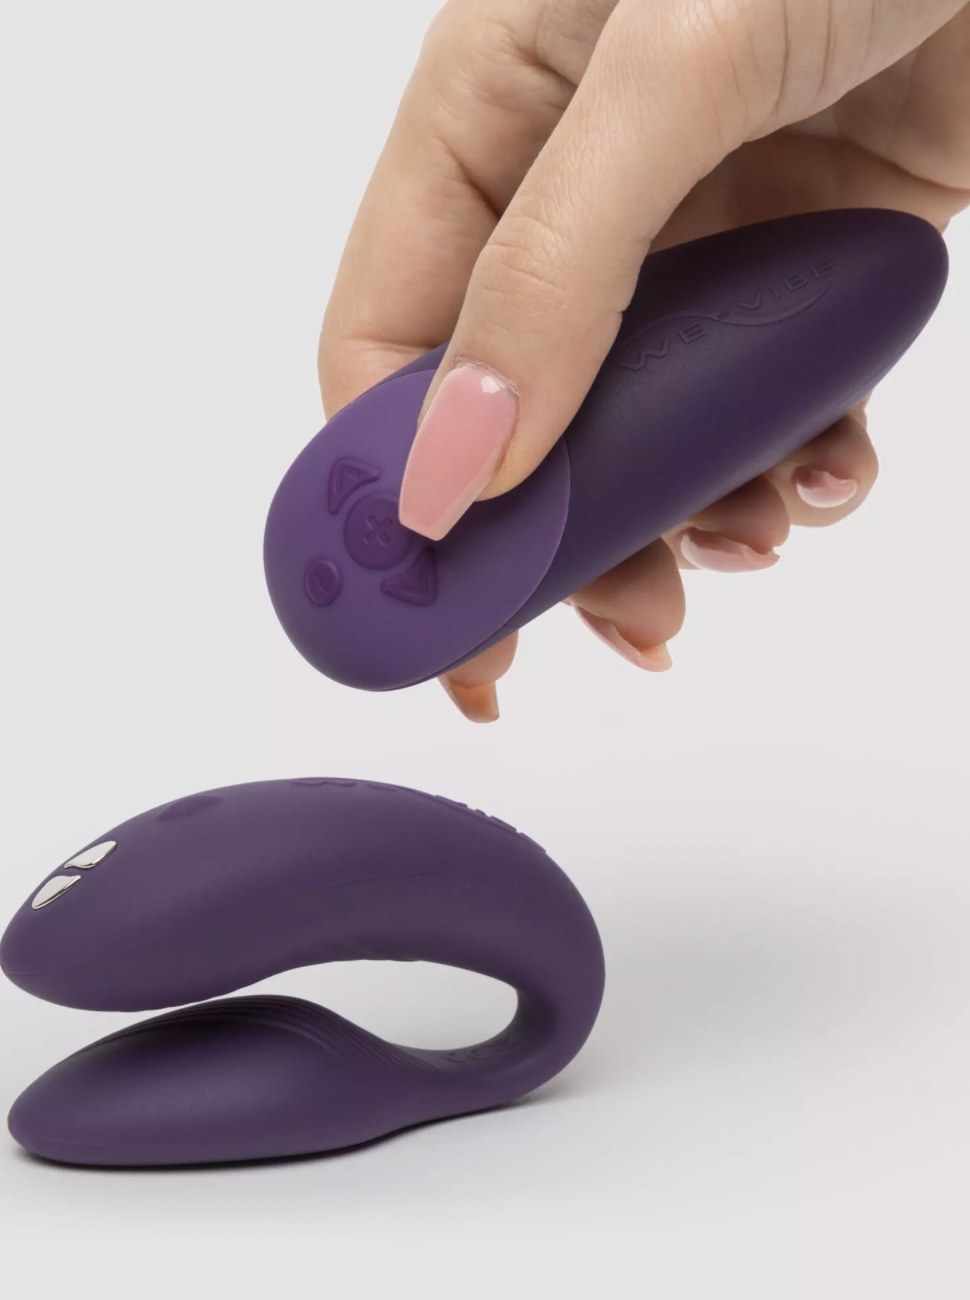 17 Sex Toys From Lovehoney That Have Truly Impressive (And Memorable) Reviews